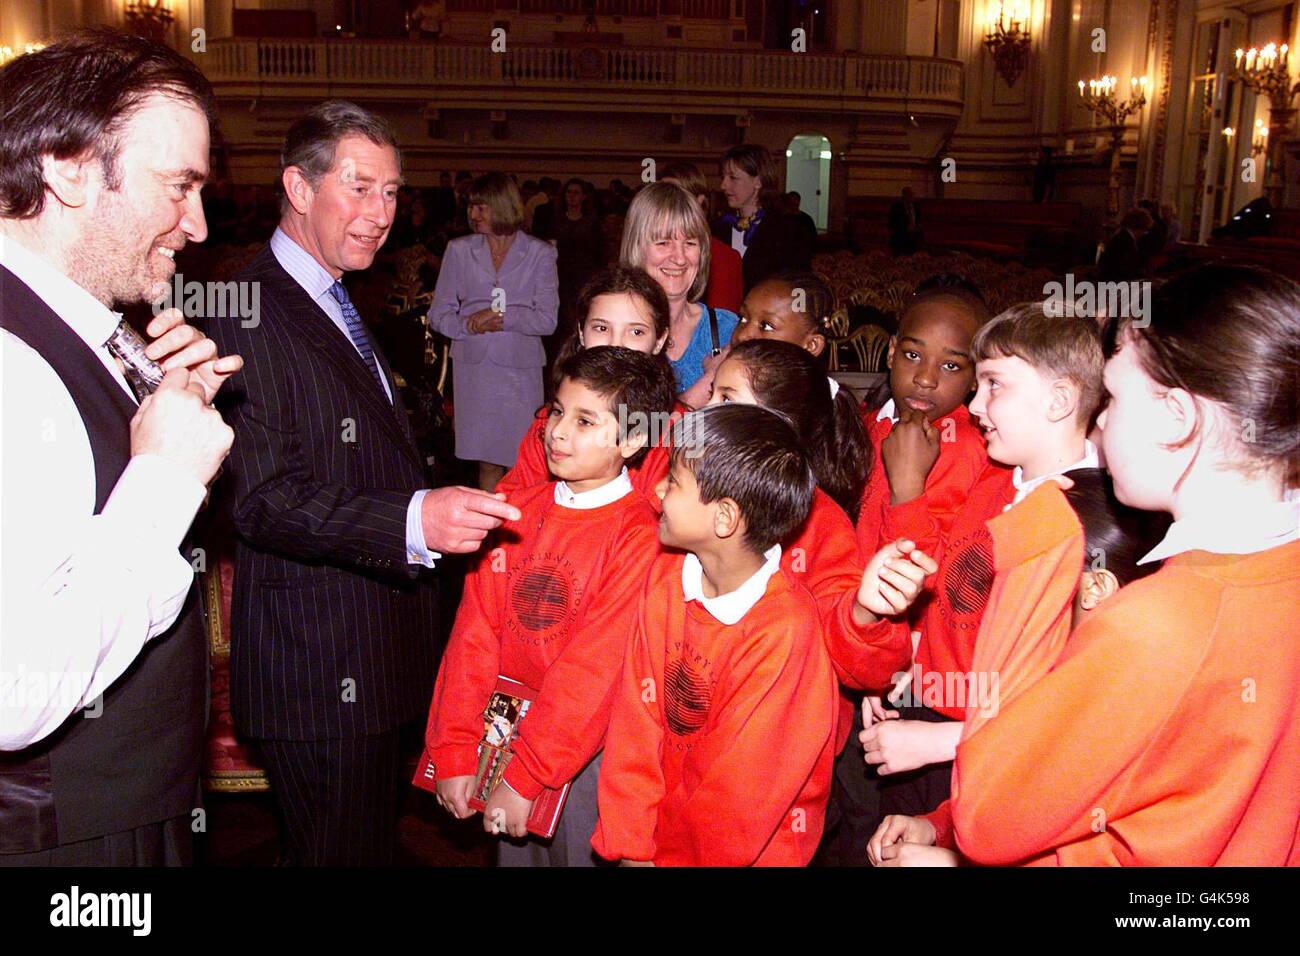 The Prince of Wales and Russian conductor Valery Gregiev (L) talk to Winton Primary school pupils, Kings Cross, after they watched a rehersal for a show of classical music and ballet in the Throne room at Buckingham Palace. * The London Philharmonia Orchestra and Kirov Ballet will perform at the concert for the Prince and invited guests, to raise funds for the companies. Stock Photo